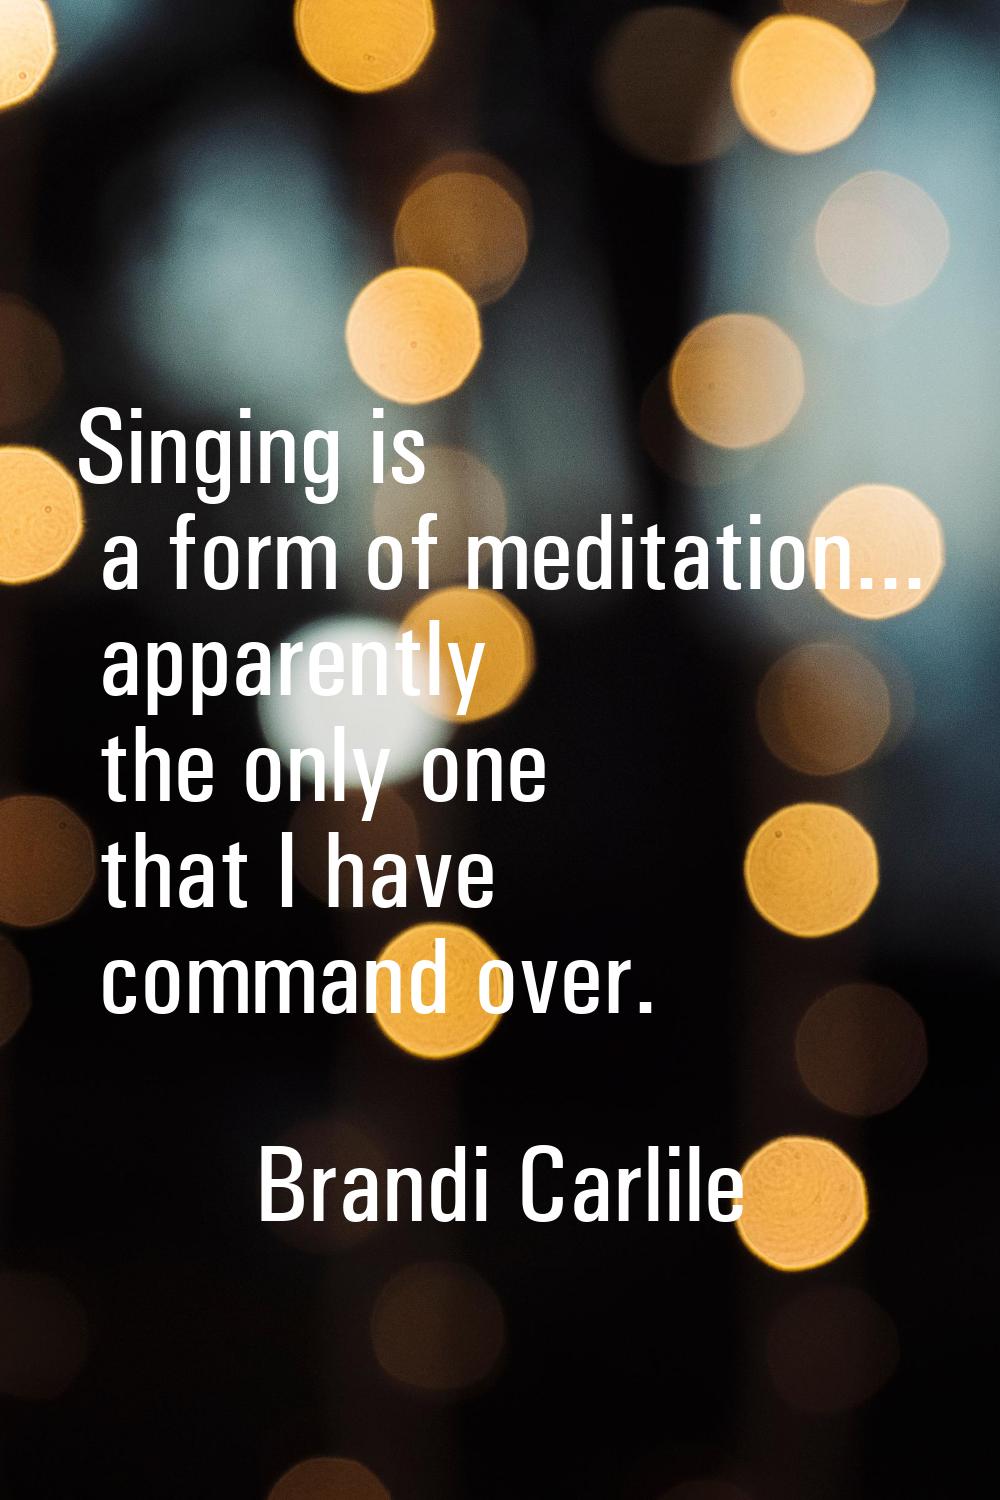 Singing is a form of meditation... apparently the only one that I have command over.